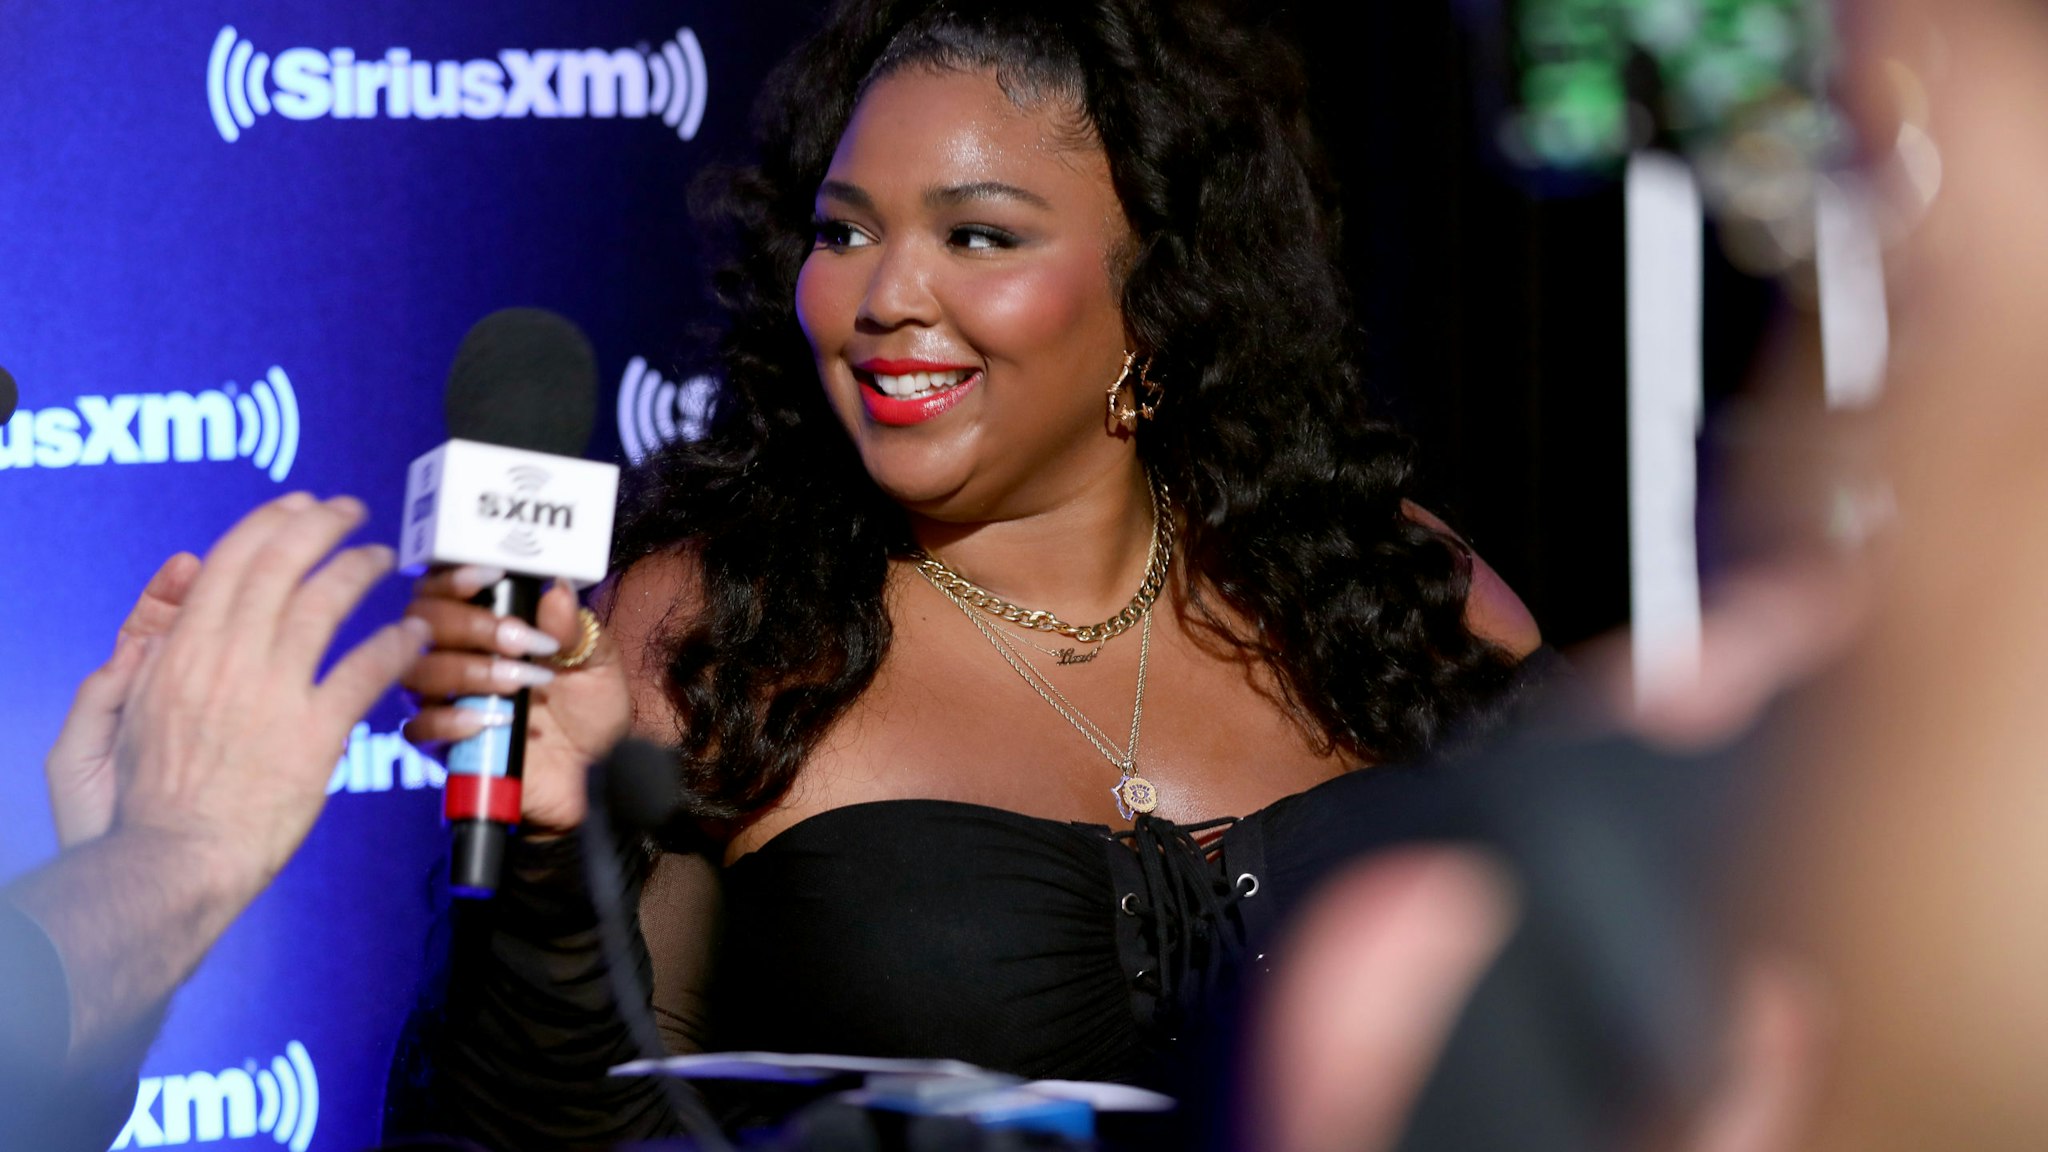 MIAMI, FLORIDA - JANUARY 31: Artist Lizzo attends day 3 of SiriusXM at Super Bowl LIV on January 31, 2020 in Miami, Florida. (Photo by Cindy Ord/Getty Images for SiriusXM )